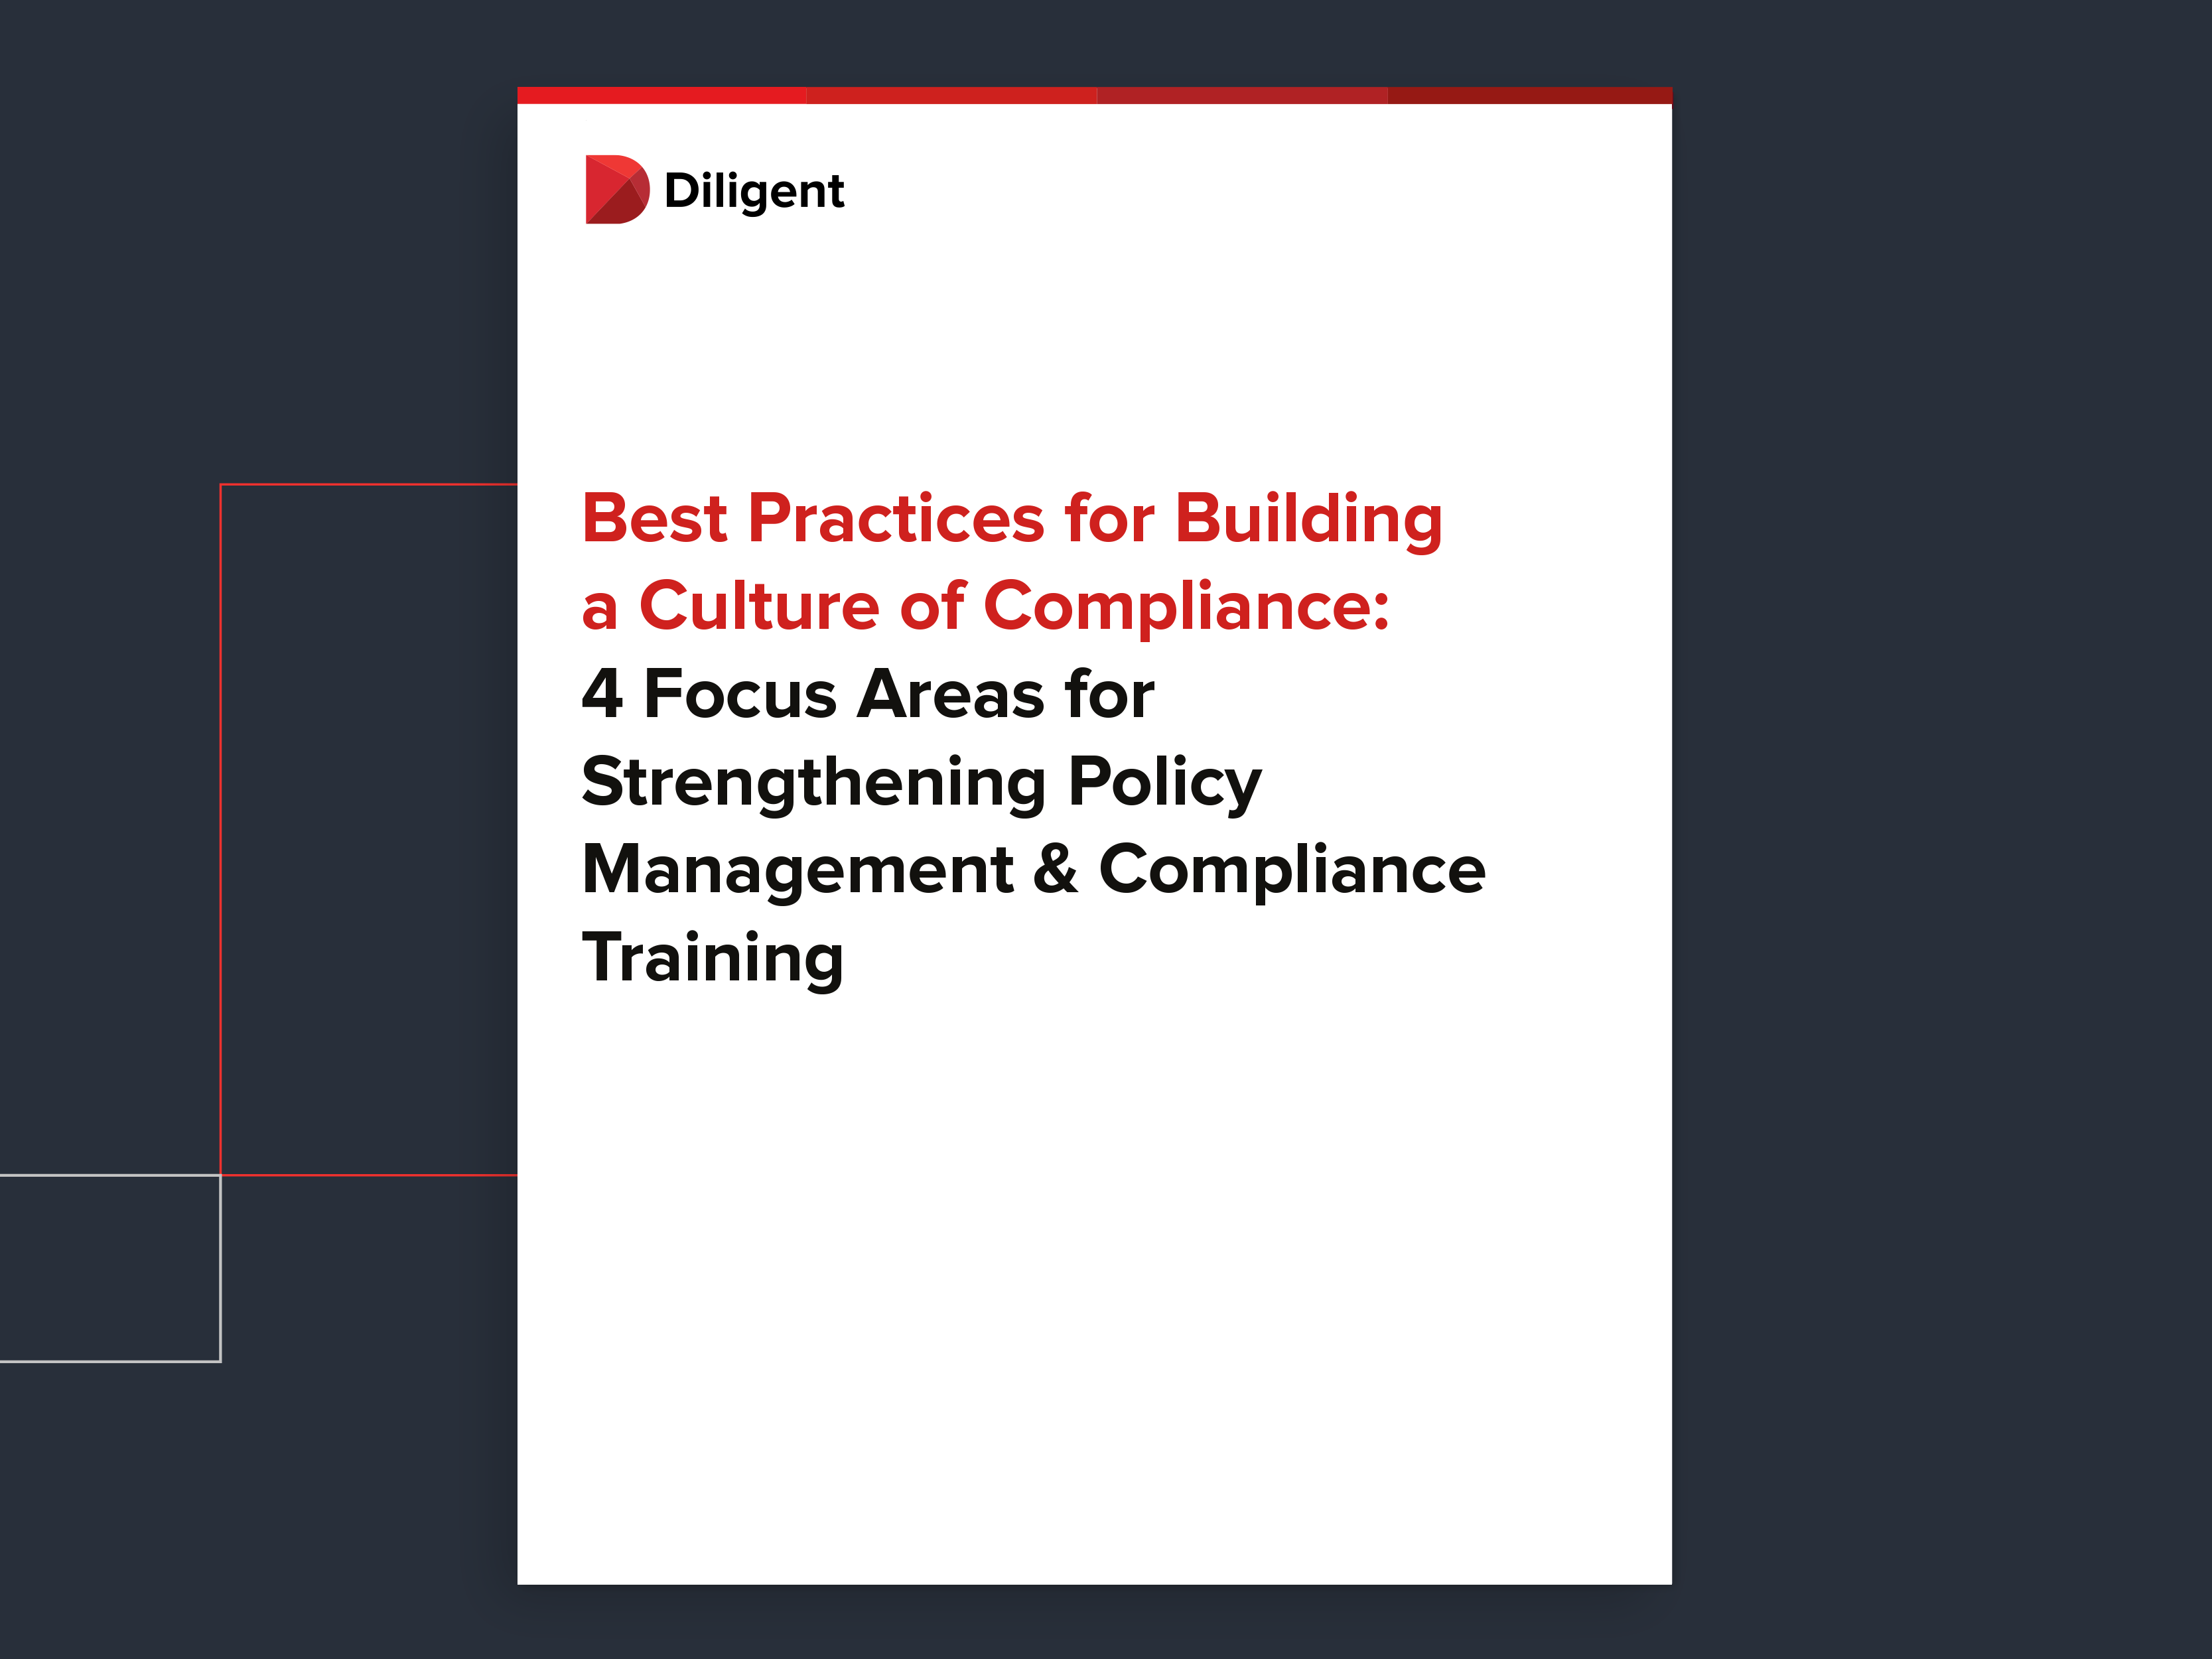 Best Practices for Building a Culture of Compliance